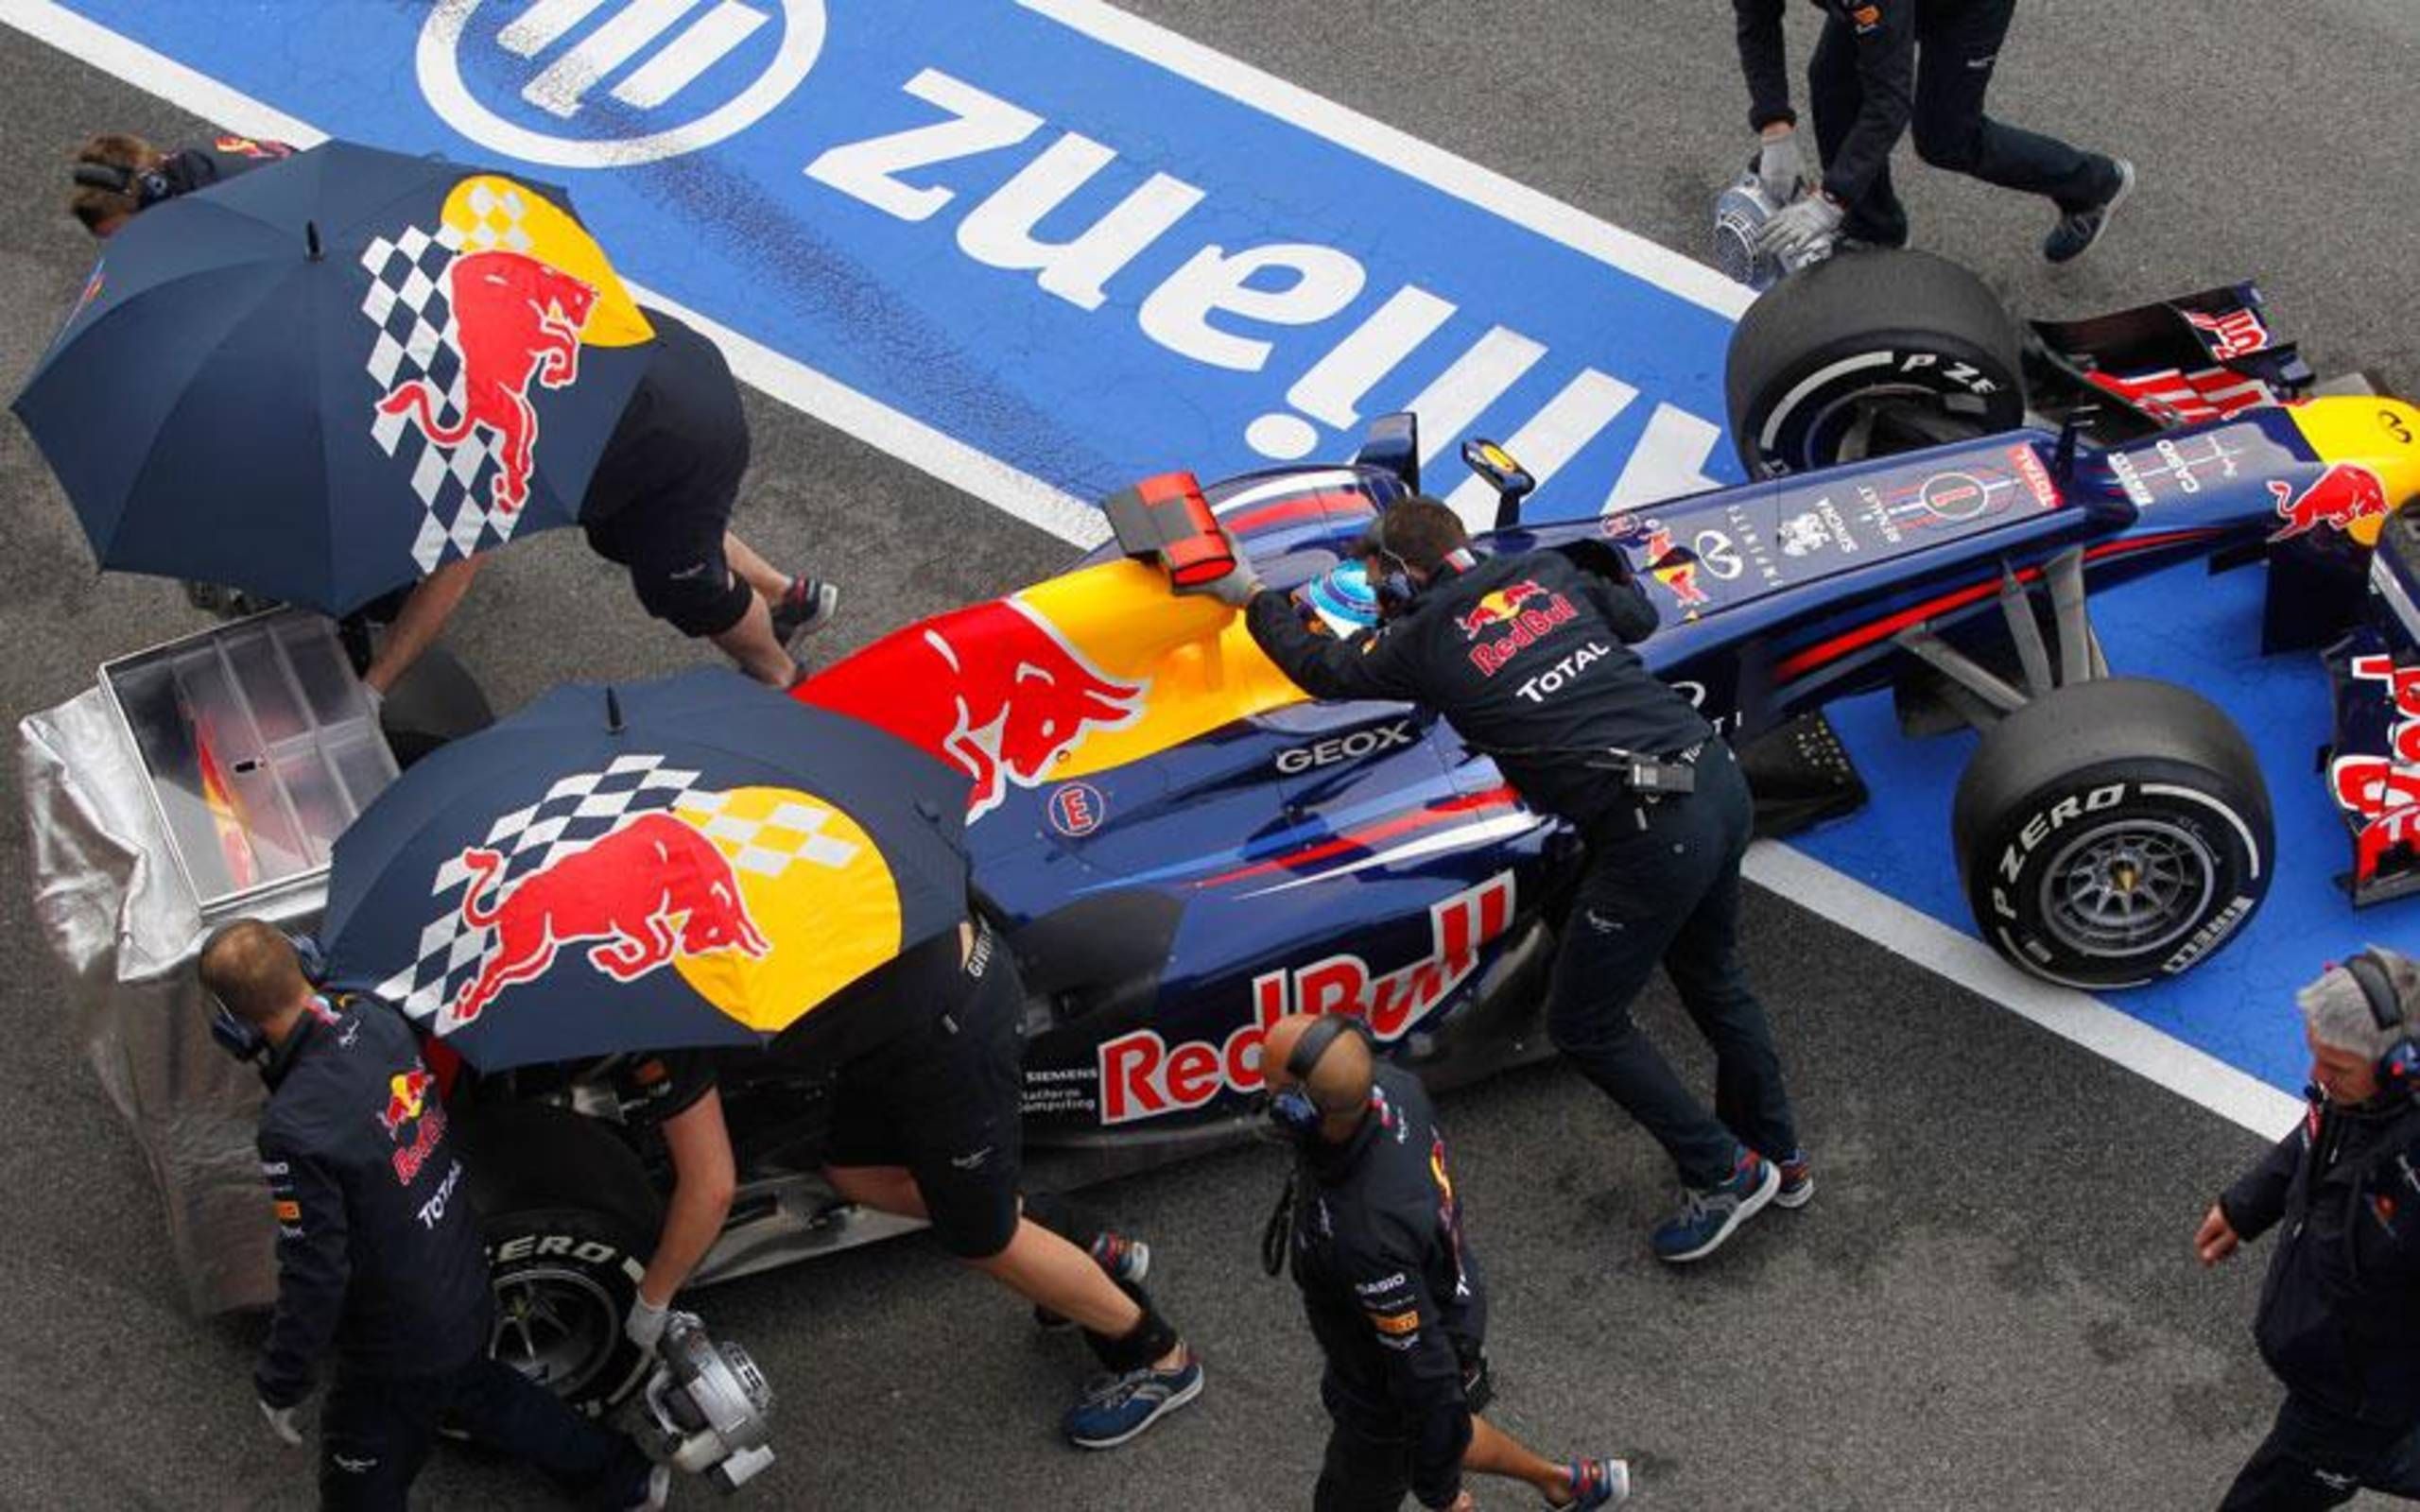 Flad Urskive Brig Formula One: Reliability not a concern at Red Bull Racing, says Vettel